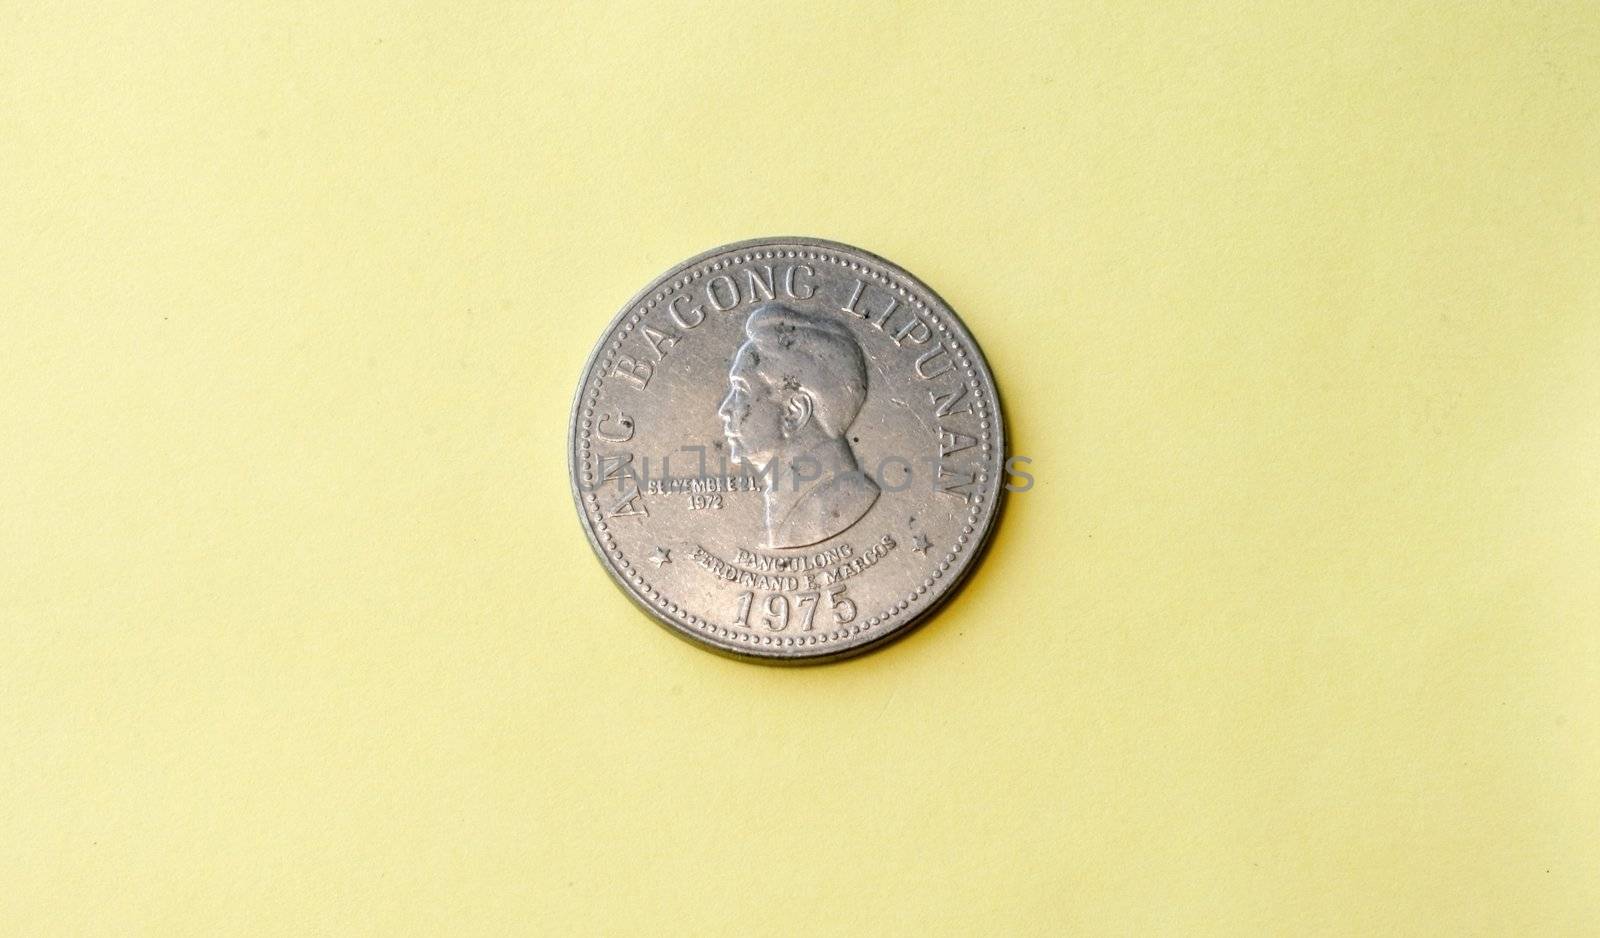 Old vintage coin circa 1972 depicting the face of Ferdinand Marcos 1972 - in a yellow background